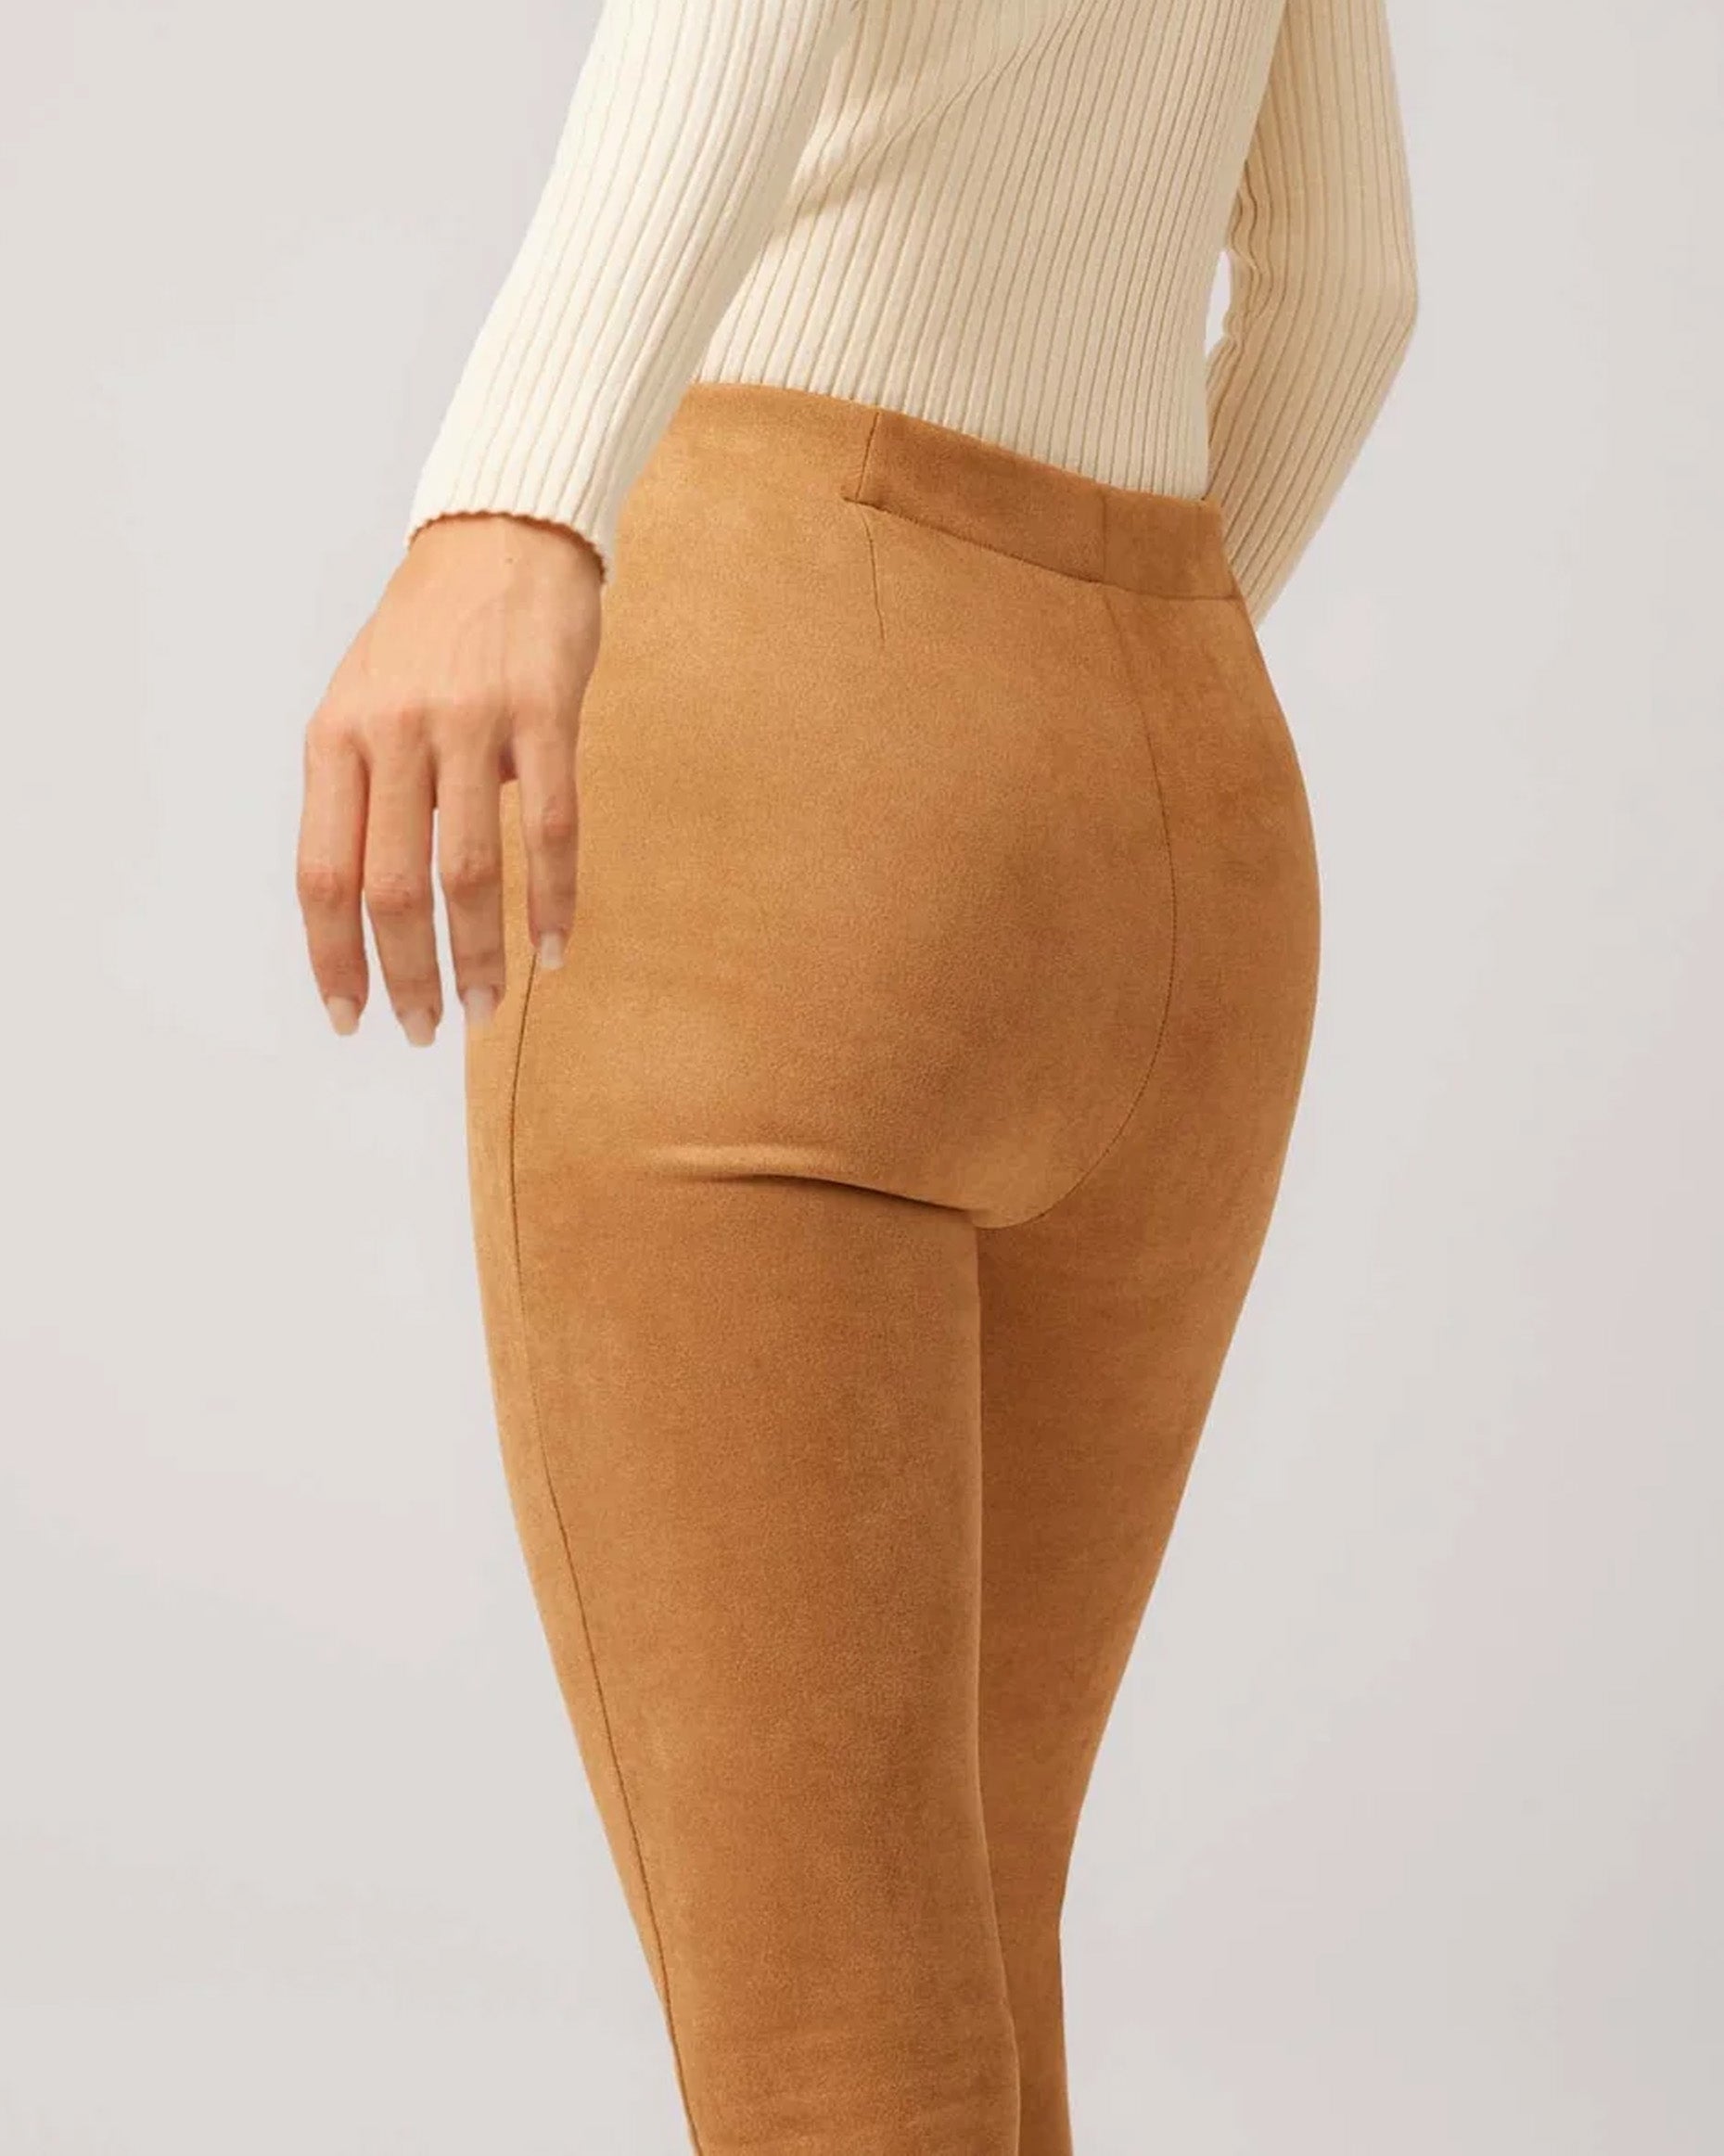 Ysabel Mora 70297 Faux Suede Leggings - Camel / tan plush velour suede effect high waisted trouser leggings, worn with cream top.